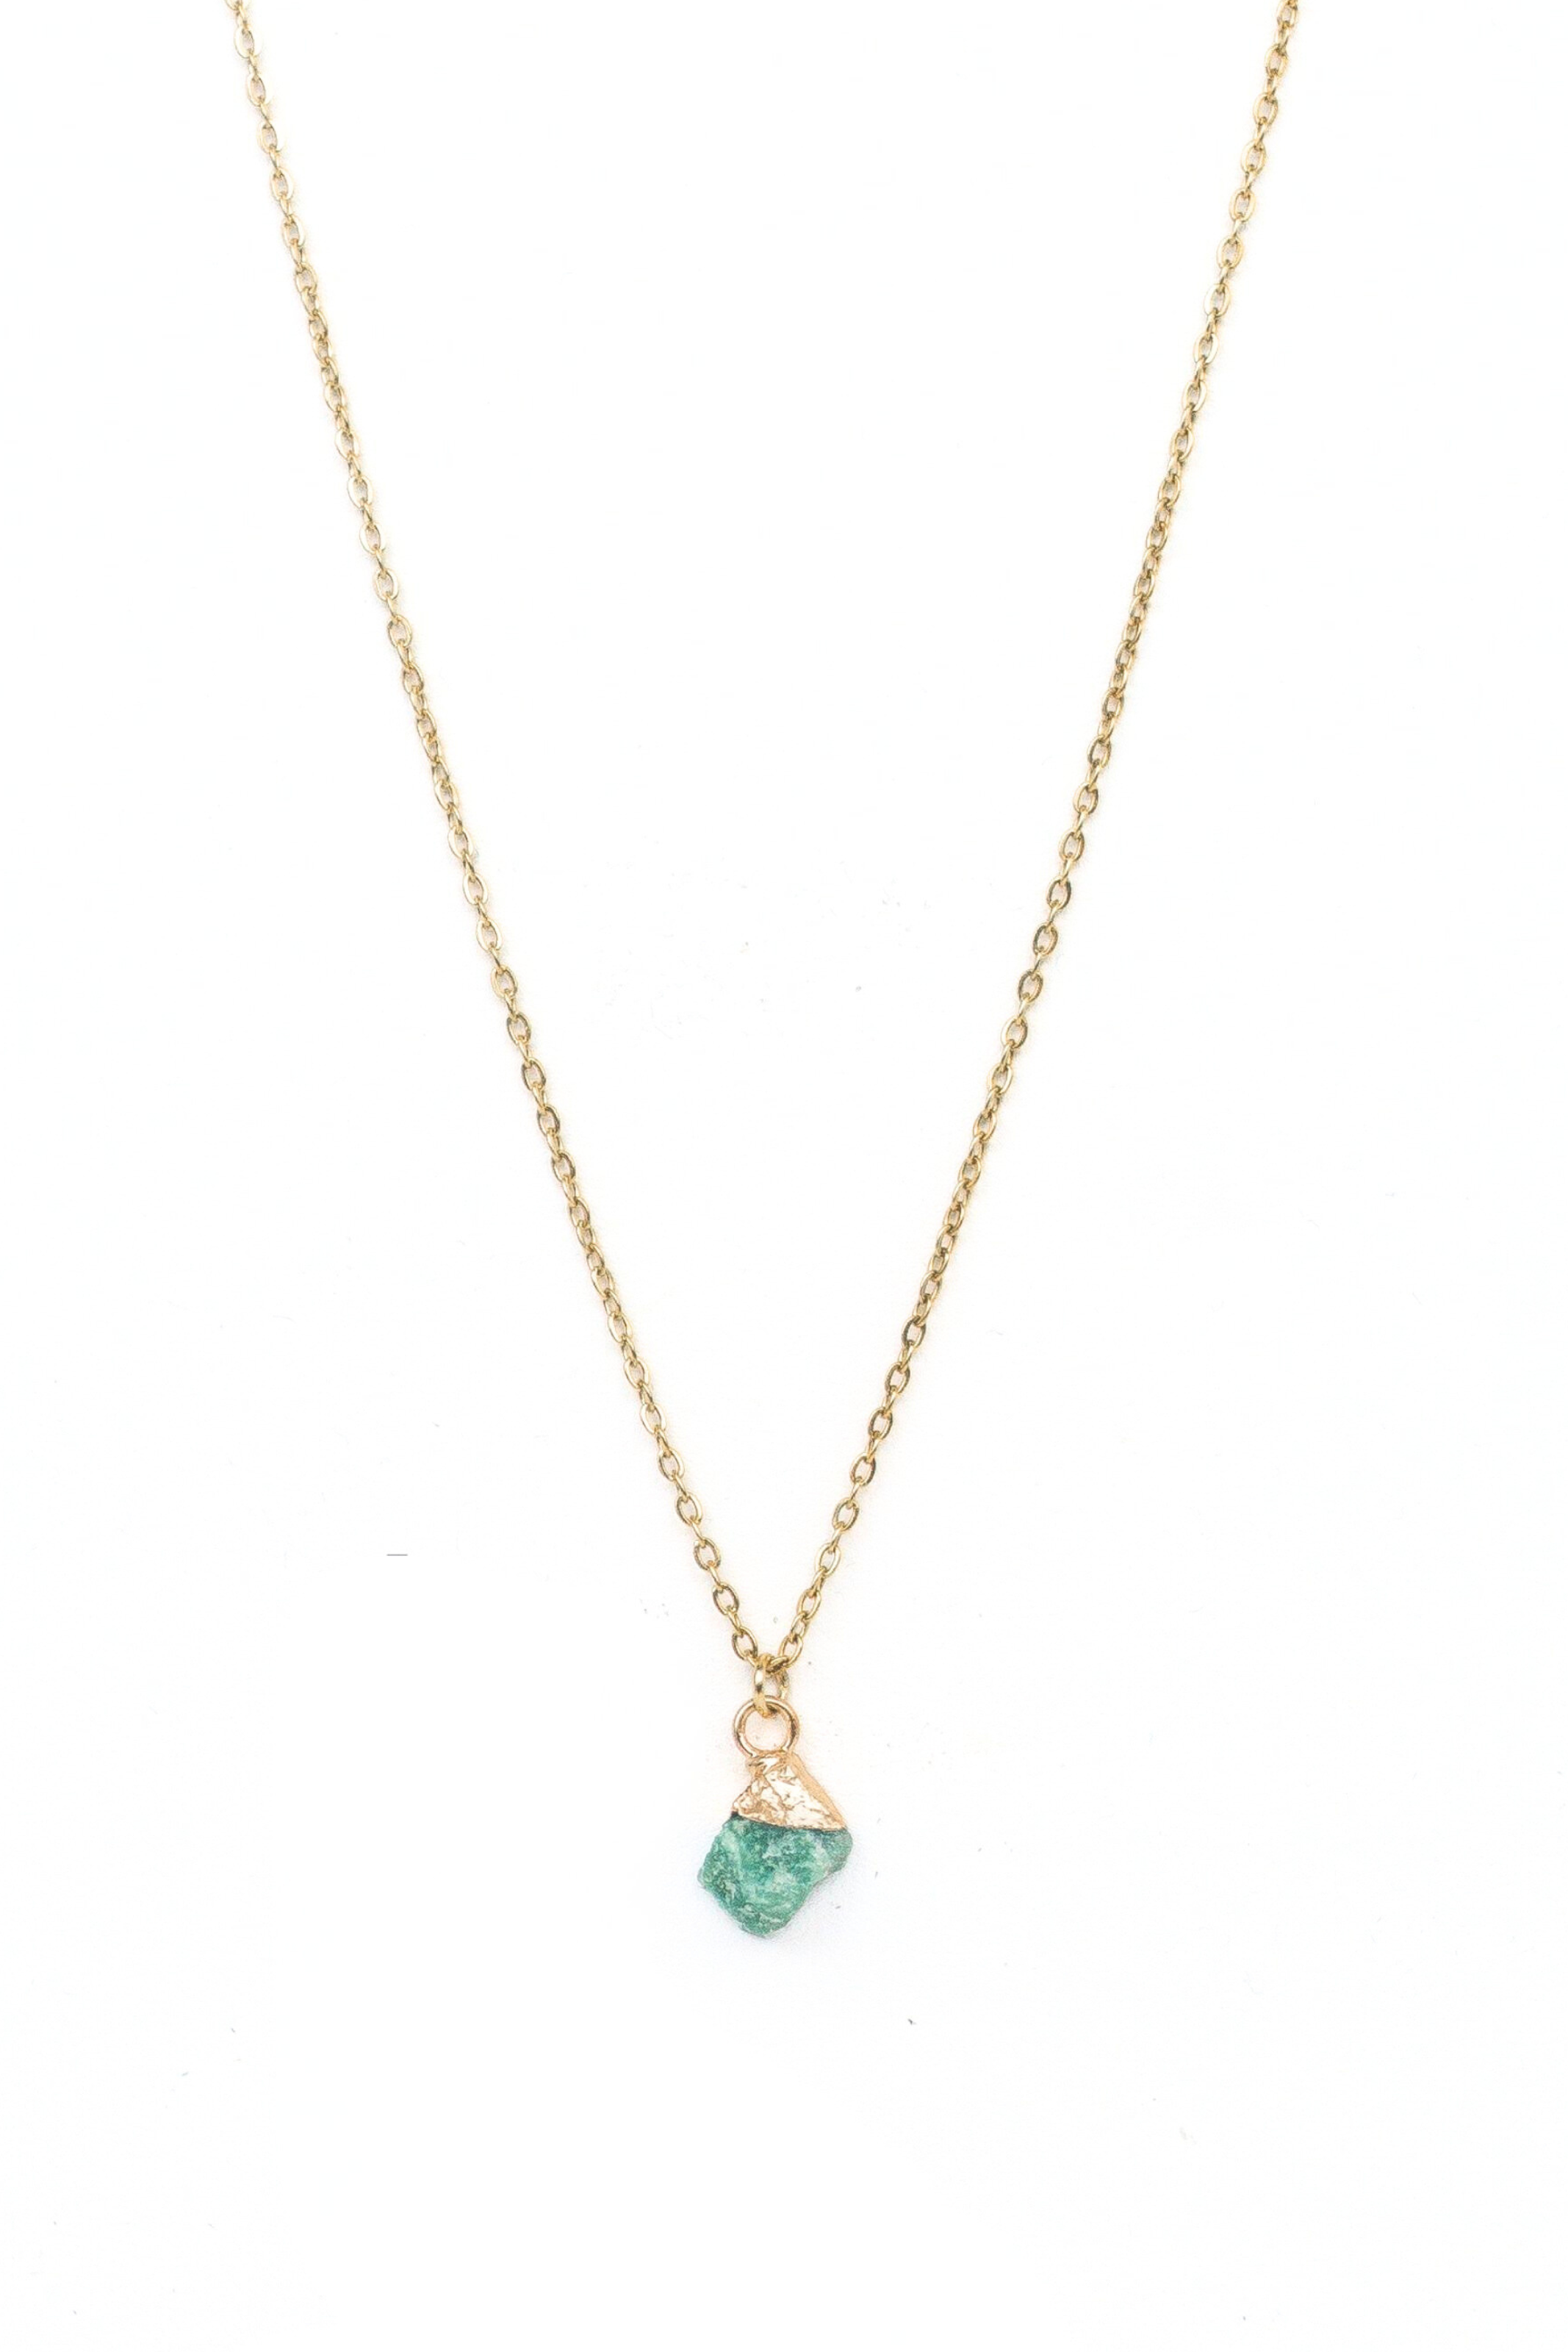 Raw Amazonite 18k Gold Plated Necklace: Natural Crystal Jewelry for Ca ...